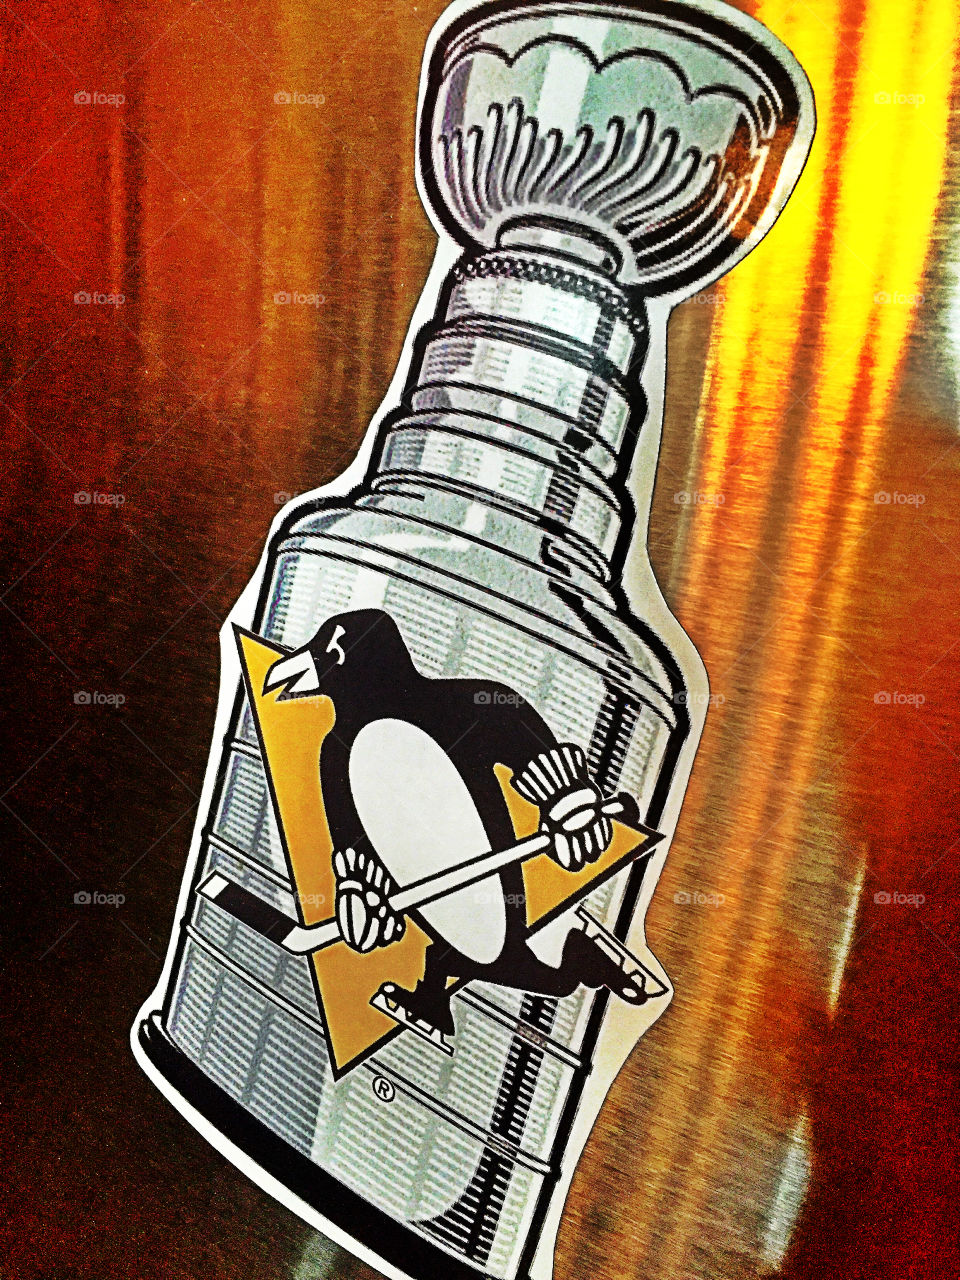 Pittsburgh Penguins Stanley Cup Champs magnet. 